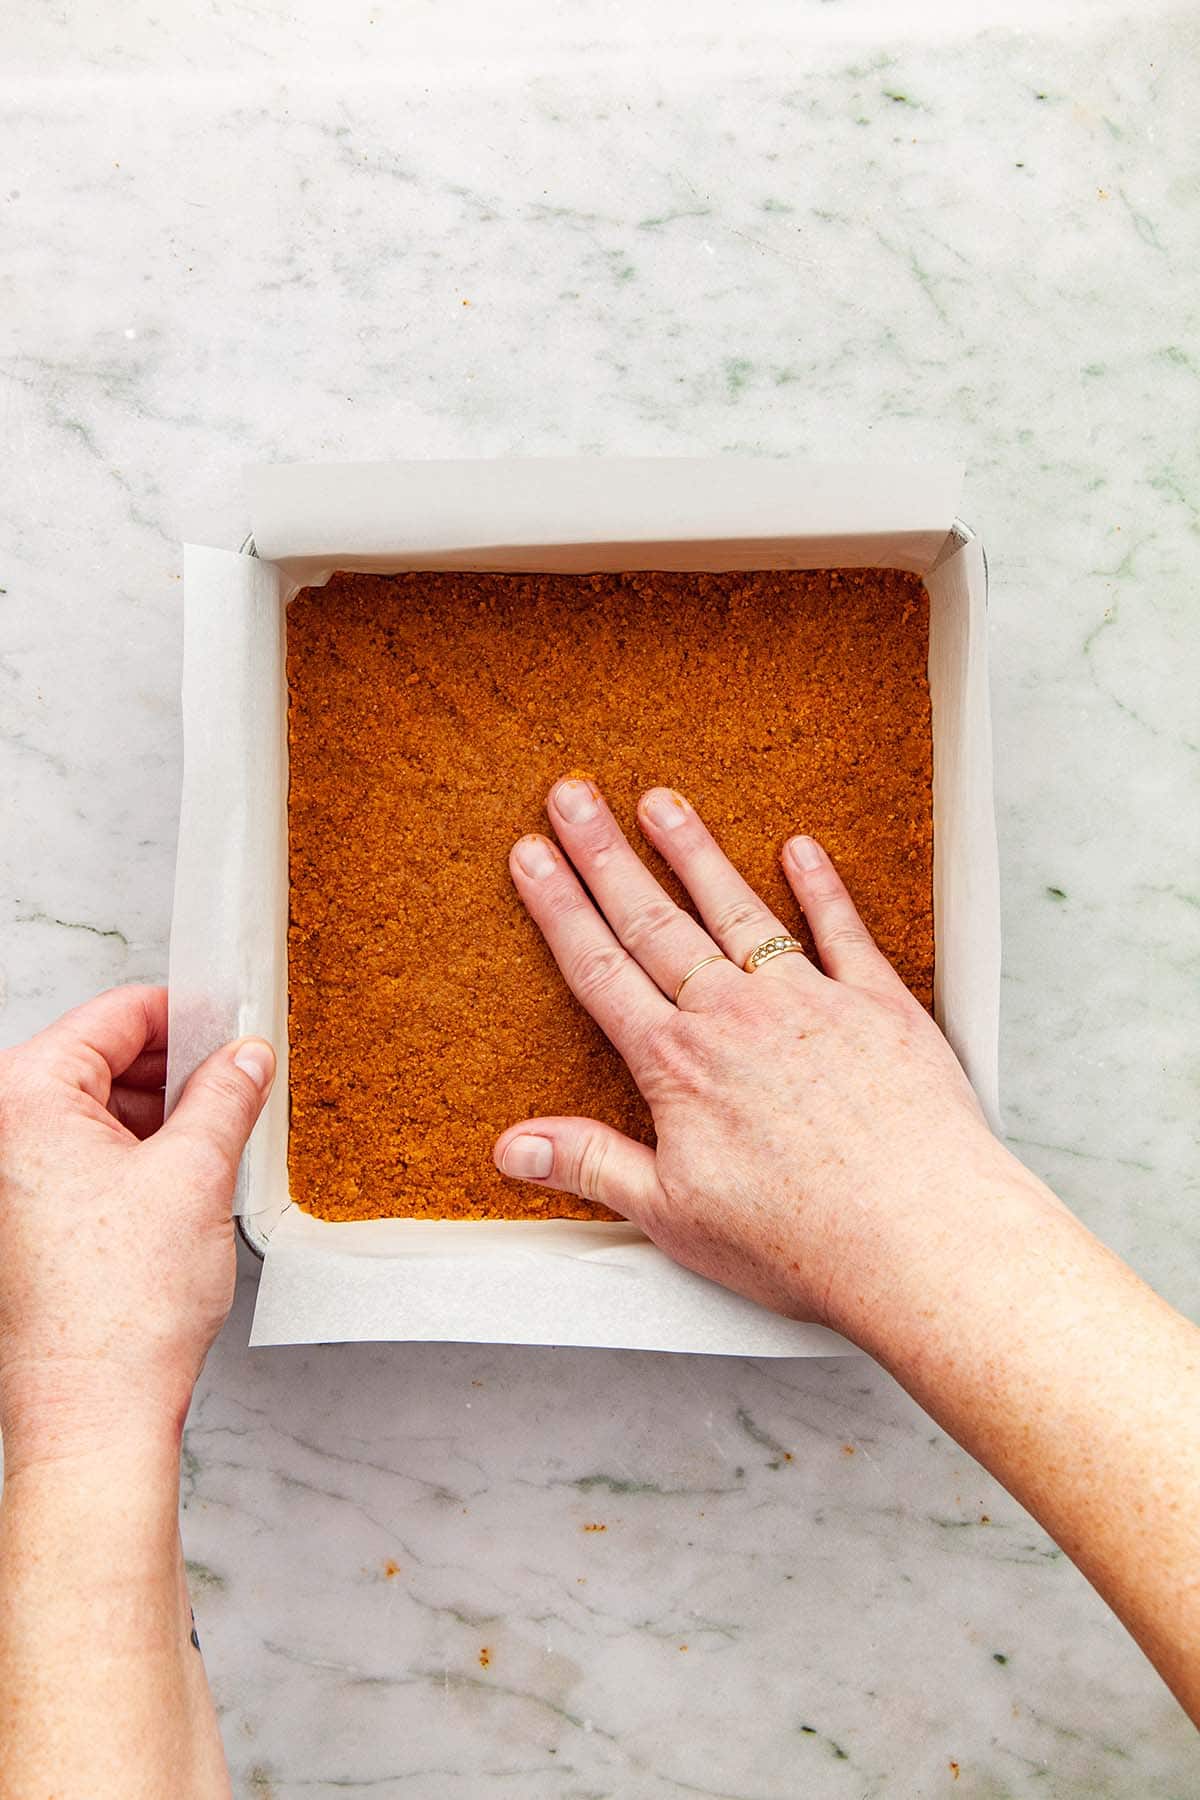 A hand finishing pressing graham crumbs into a square pan.